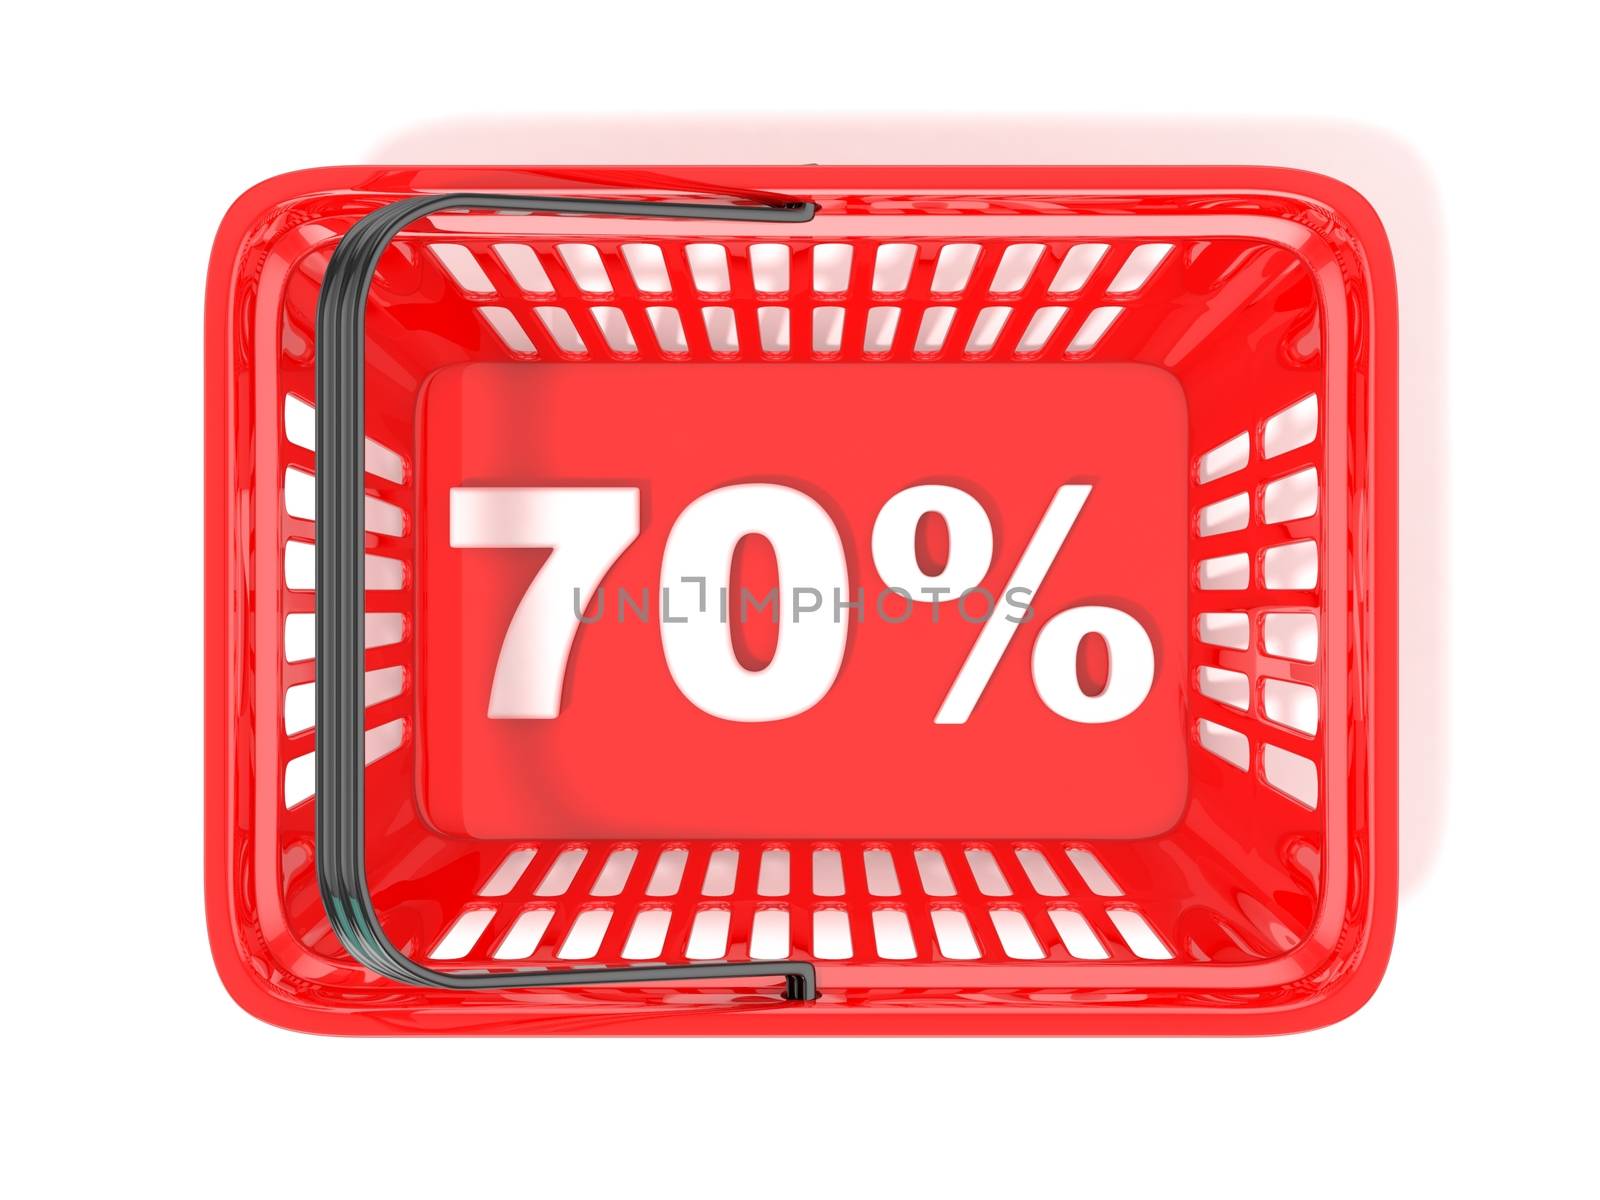 70 percent discount tag in red shopping basket. 3D rendered illustration